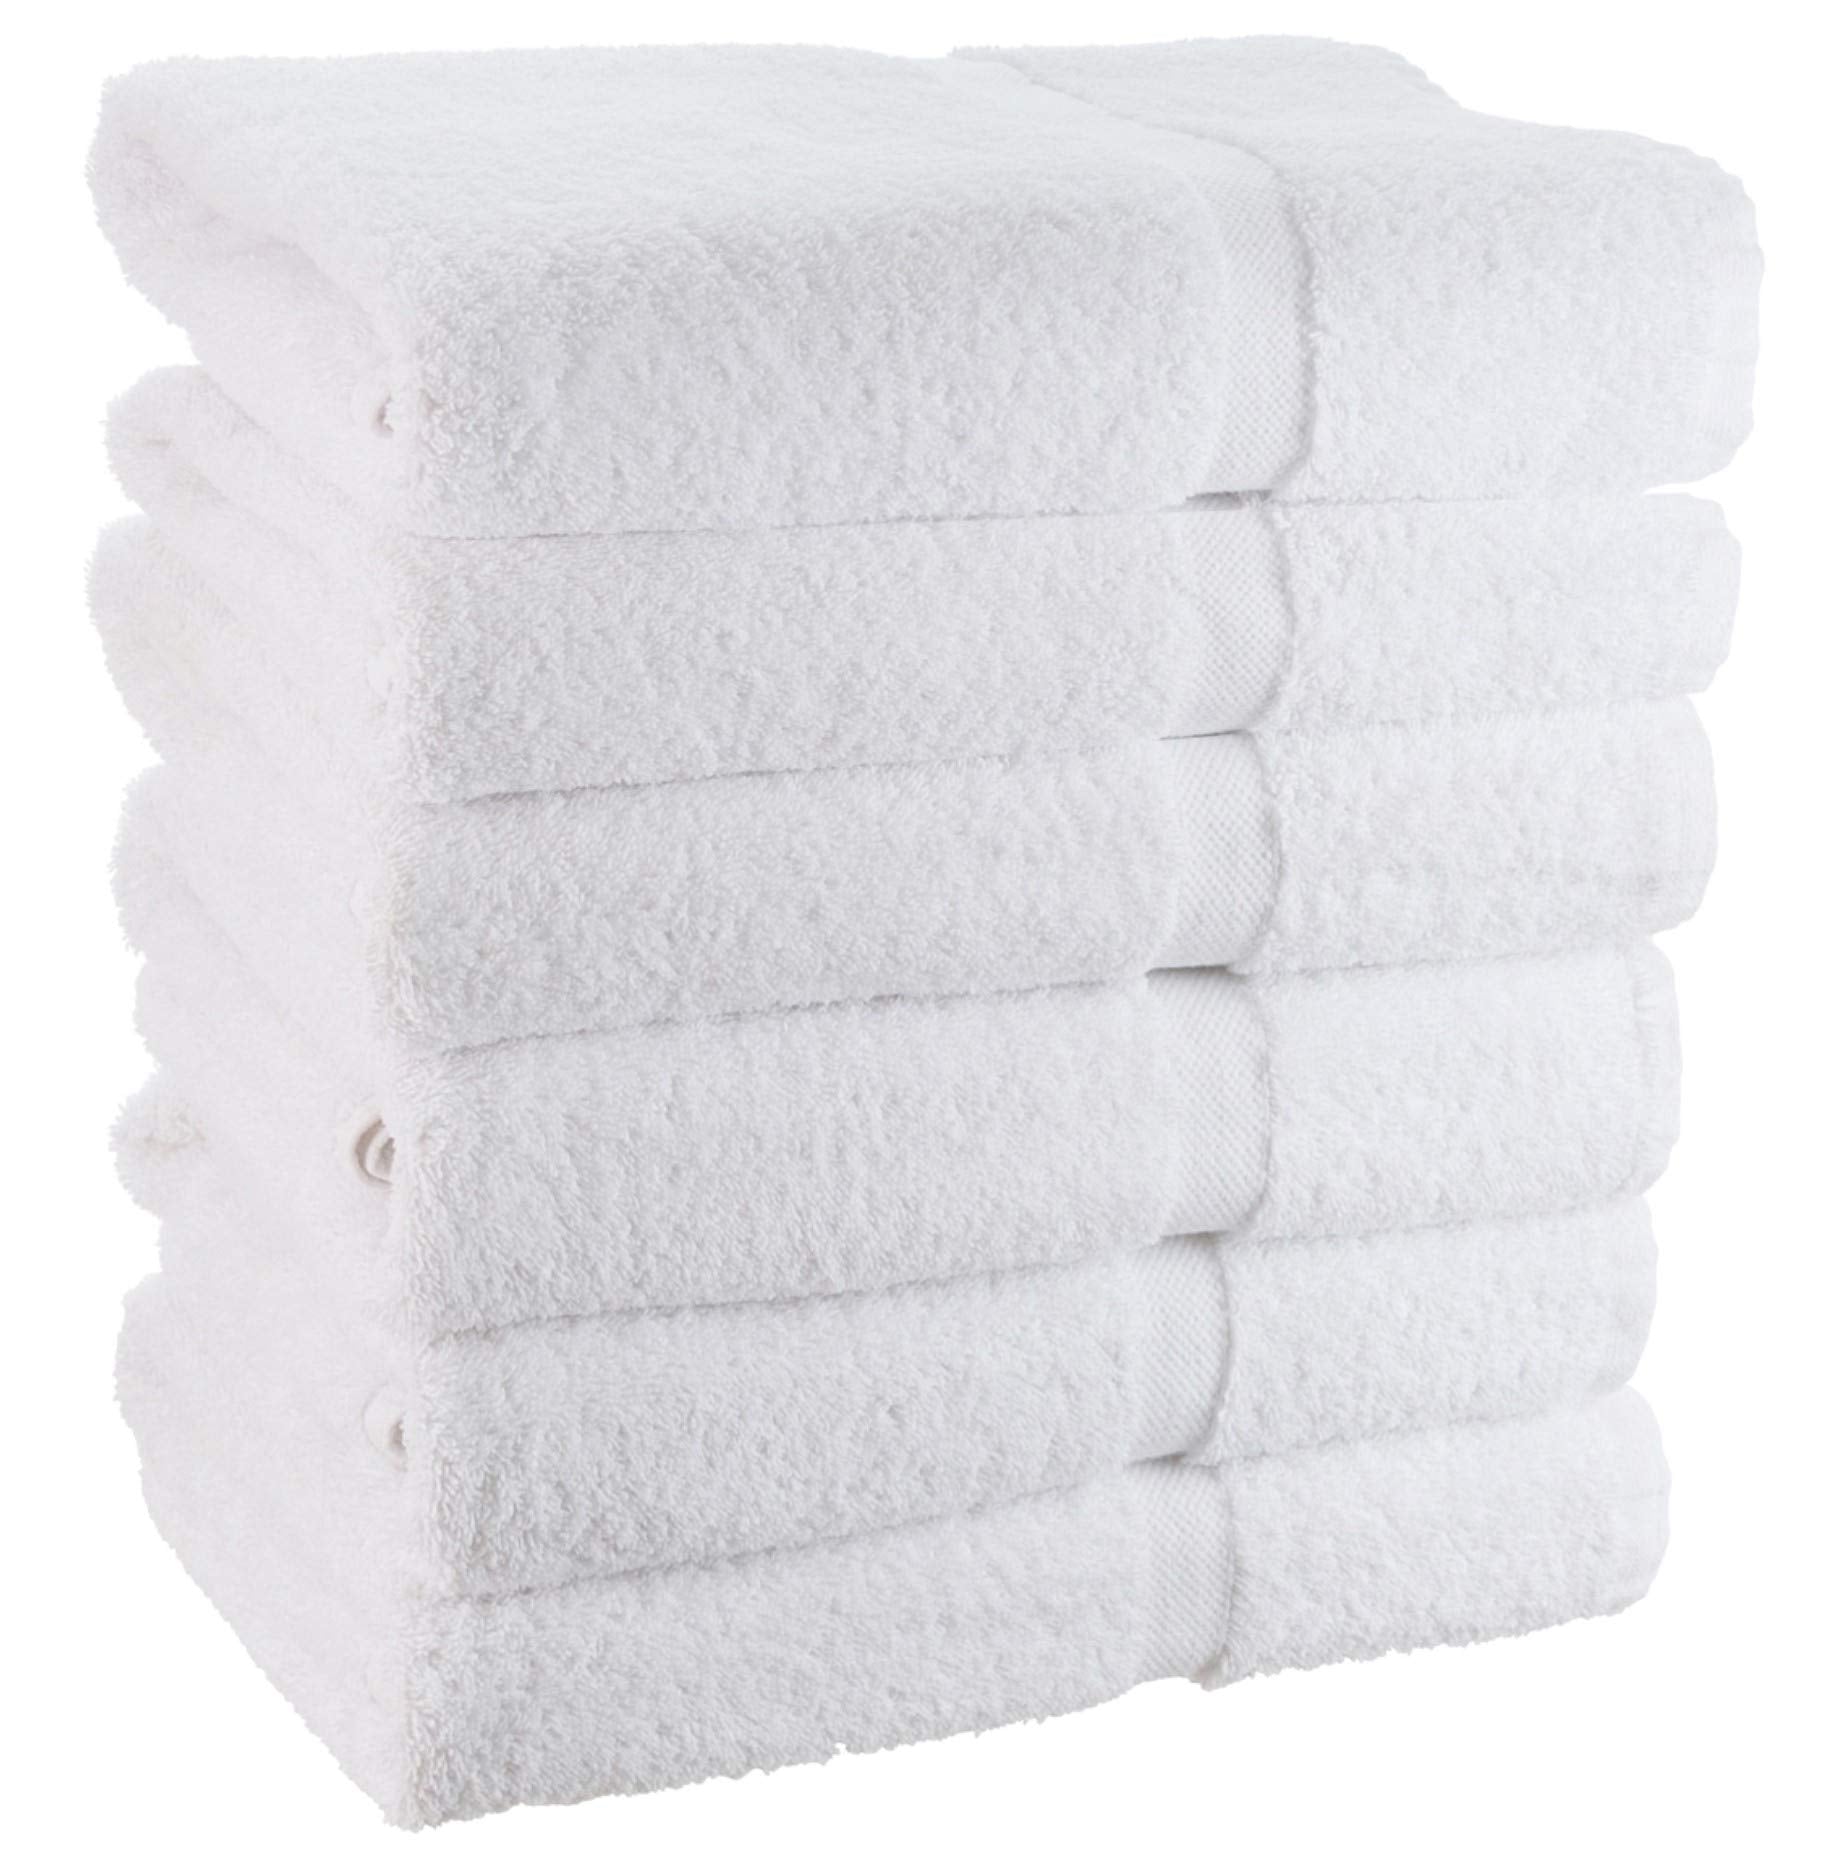 Wealuxe White Bath Towels 24x50 Inch, Cotton Towel Set for Bathroom, Hotel,  Gym, Spa, Soft Extra Absorbent Quick Dry 6 Pack White 24x50 Inch - Medium